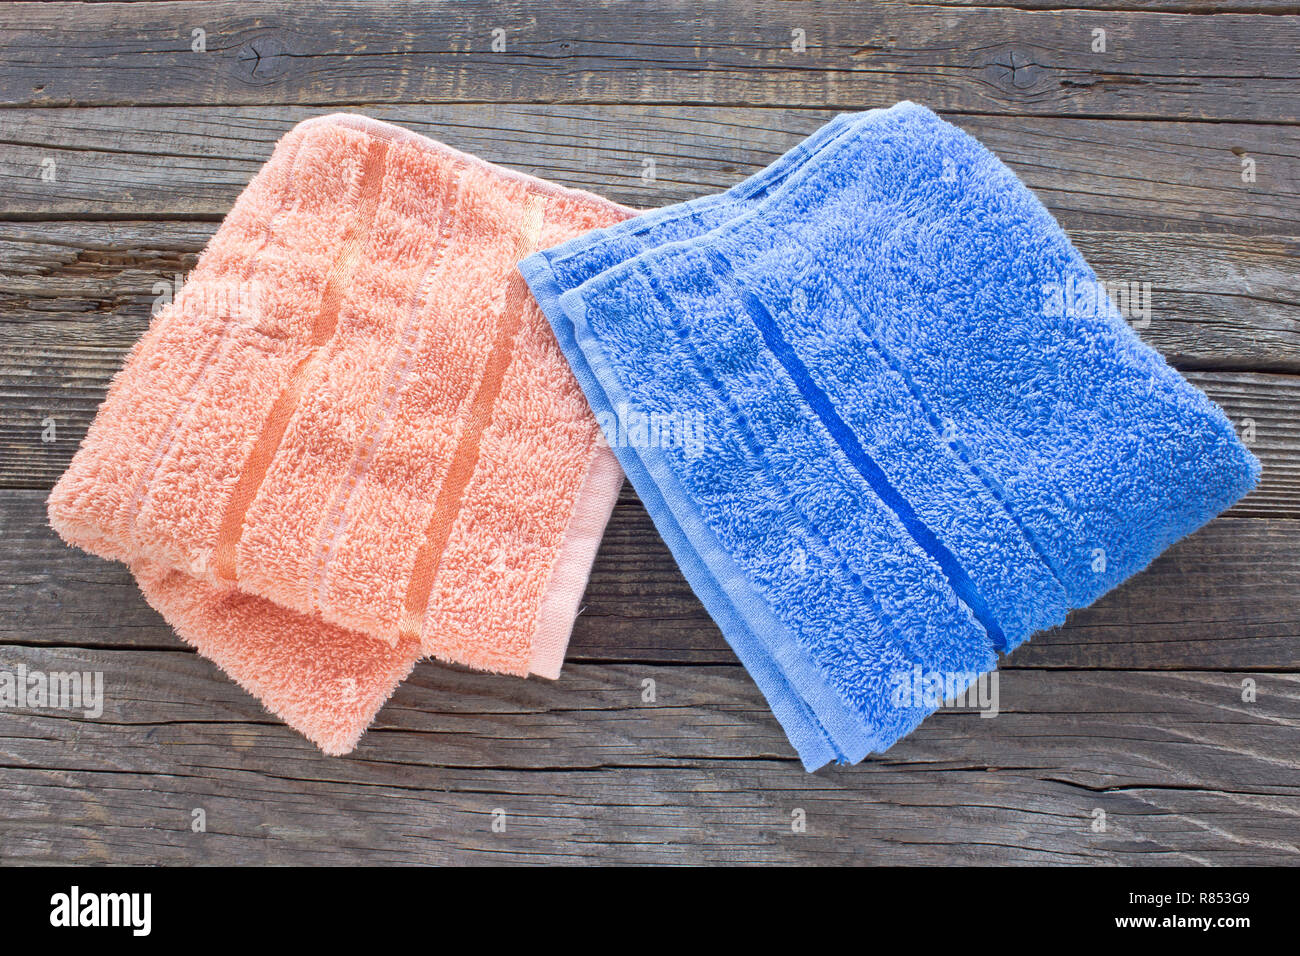 Towels on wooden background Stock Photo